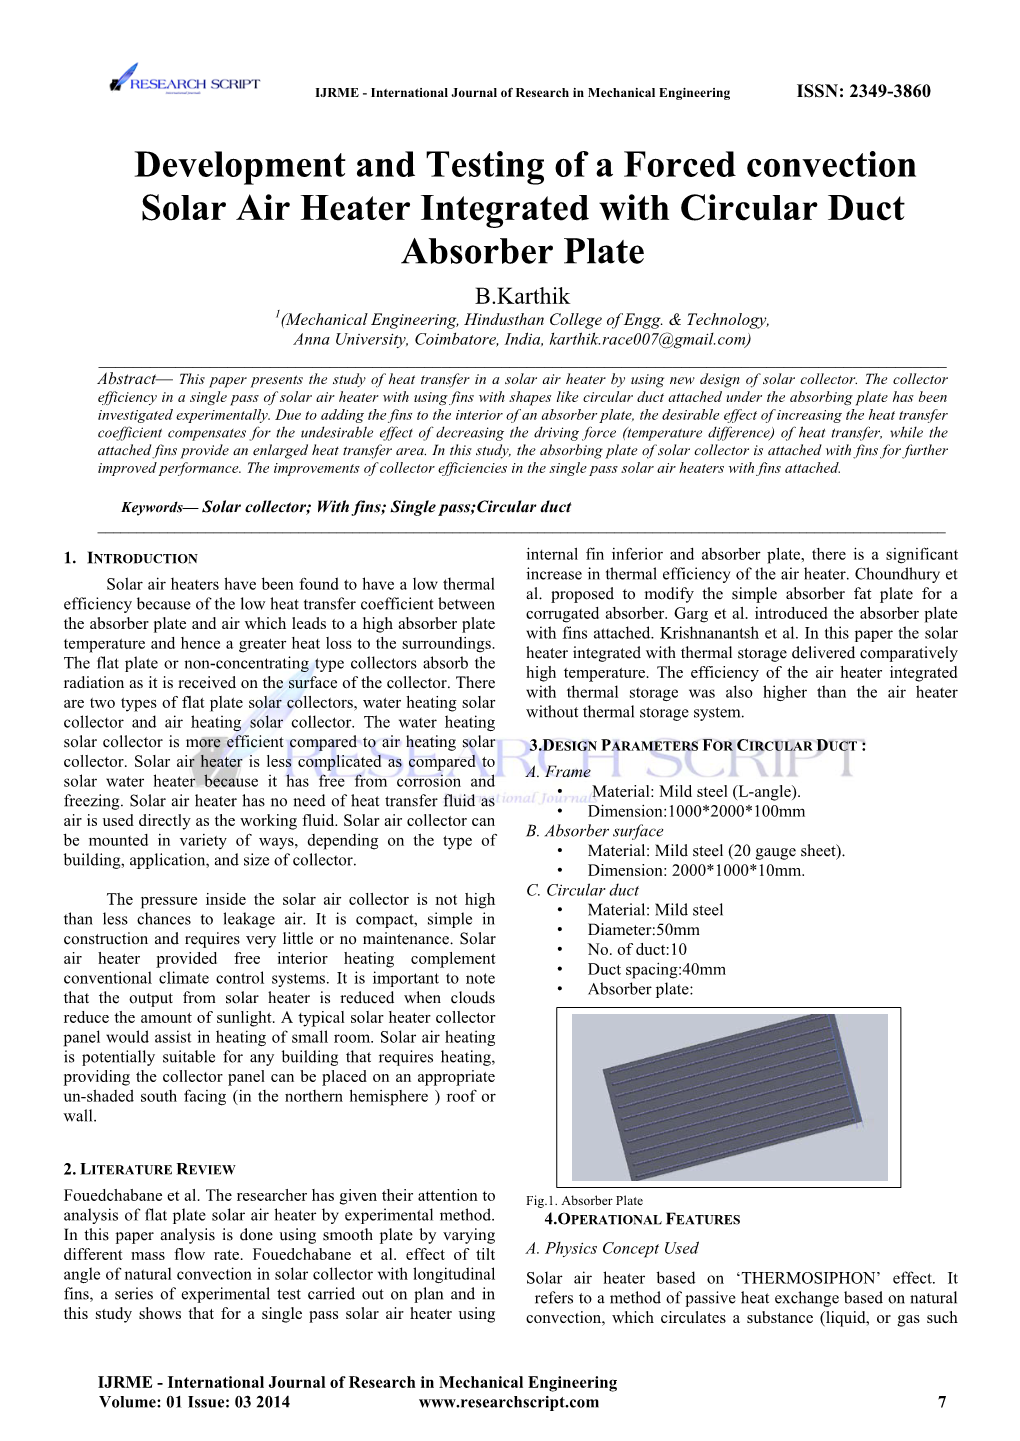 Development and Testing of a Forced Convection Solar Air Heater